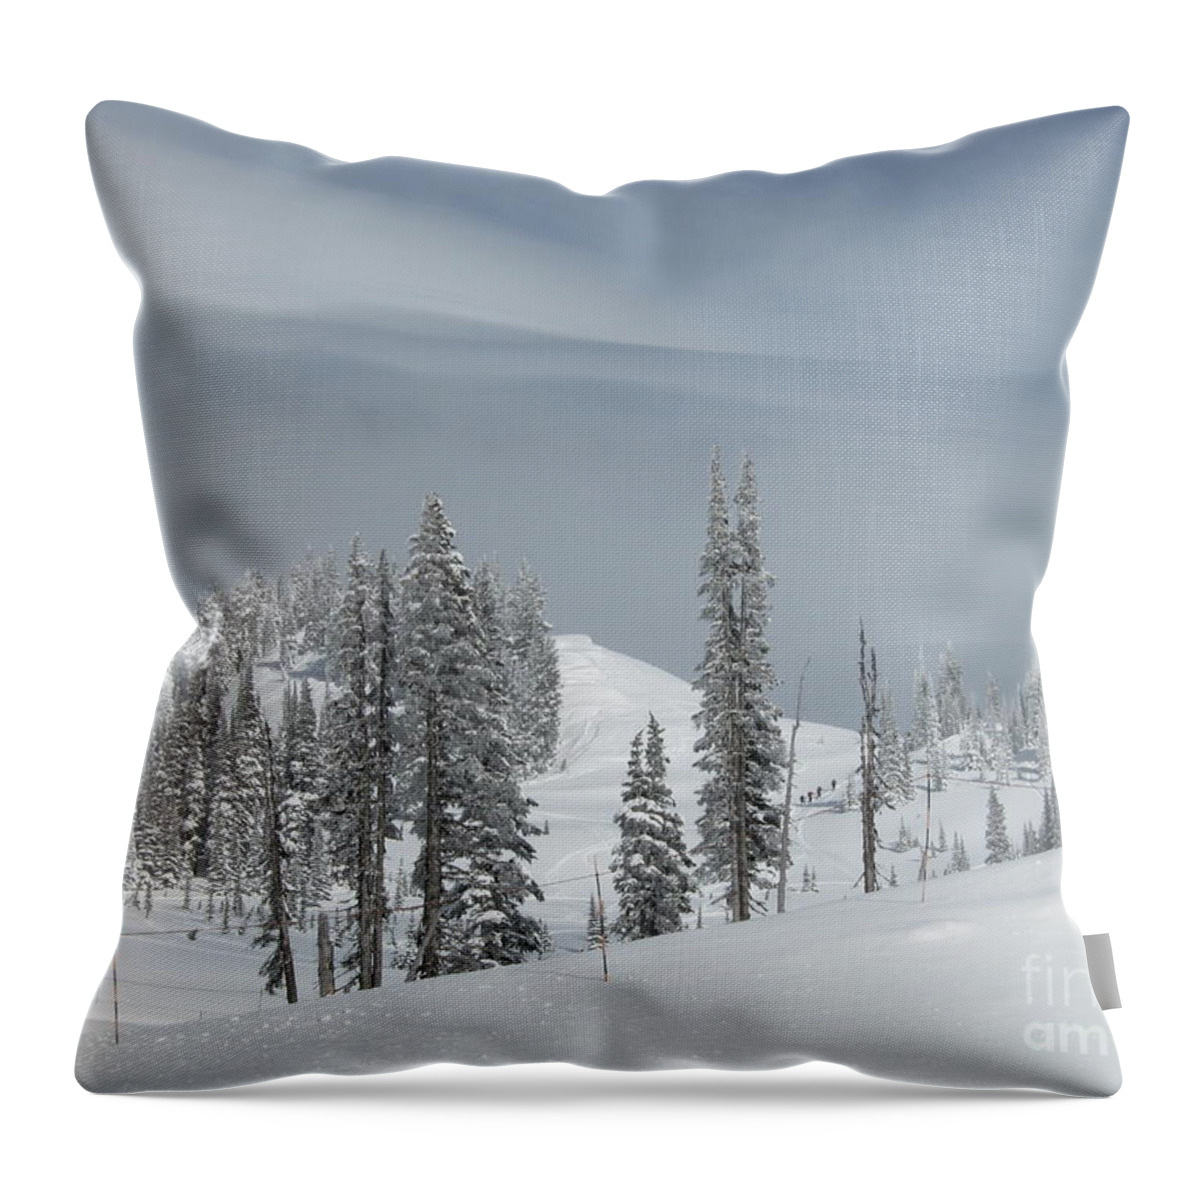 Snow Throw Pillow featuring the photograph Untitled #22 by John Huntsman